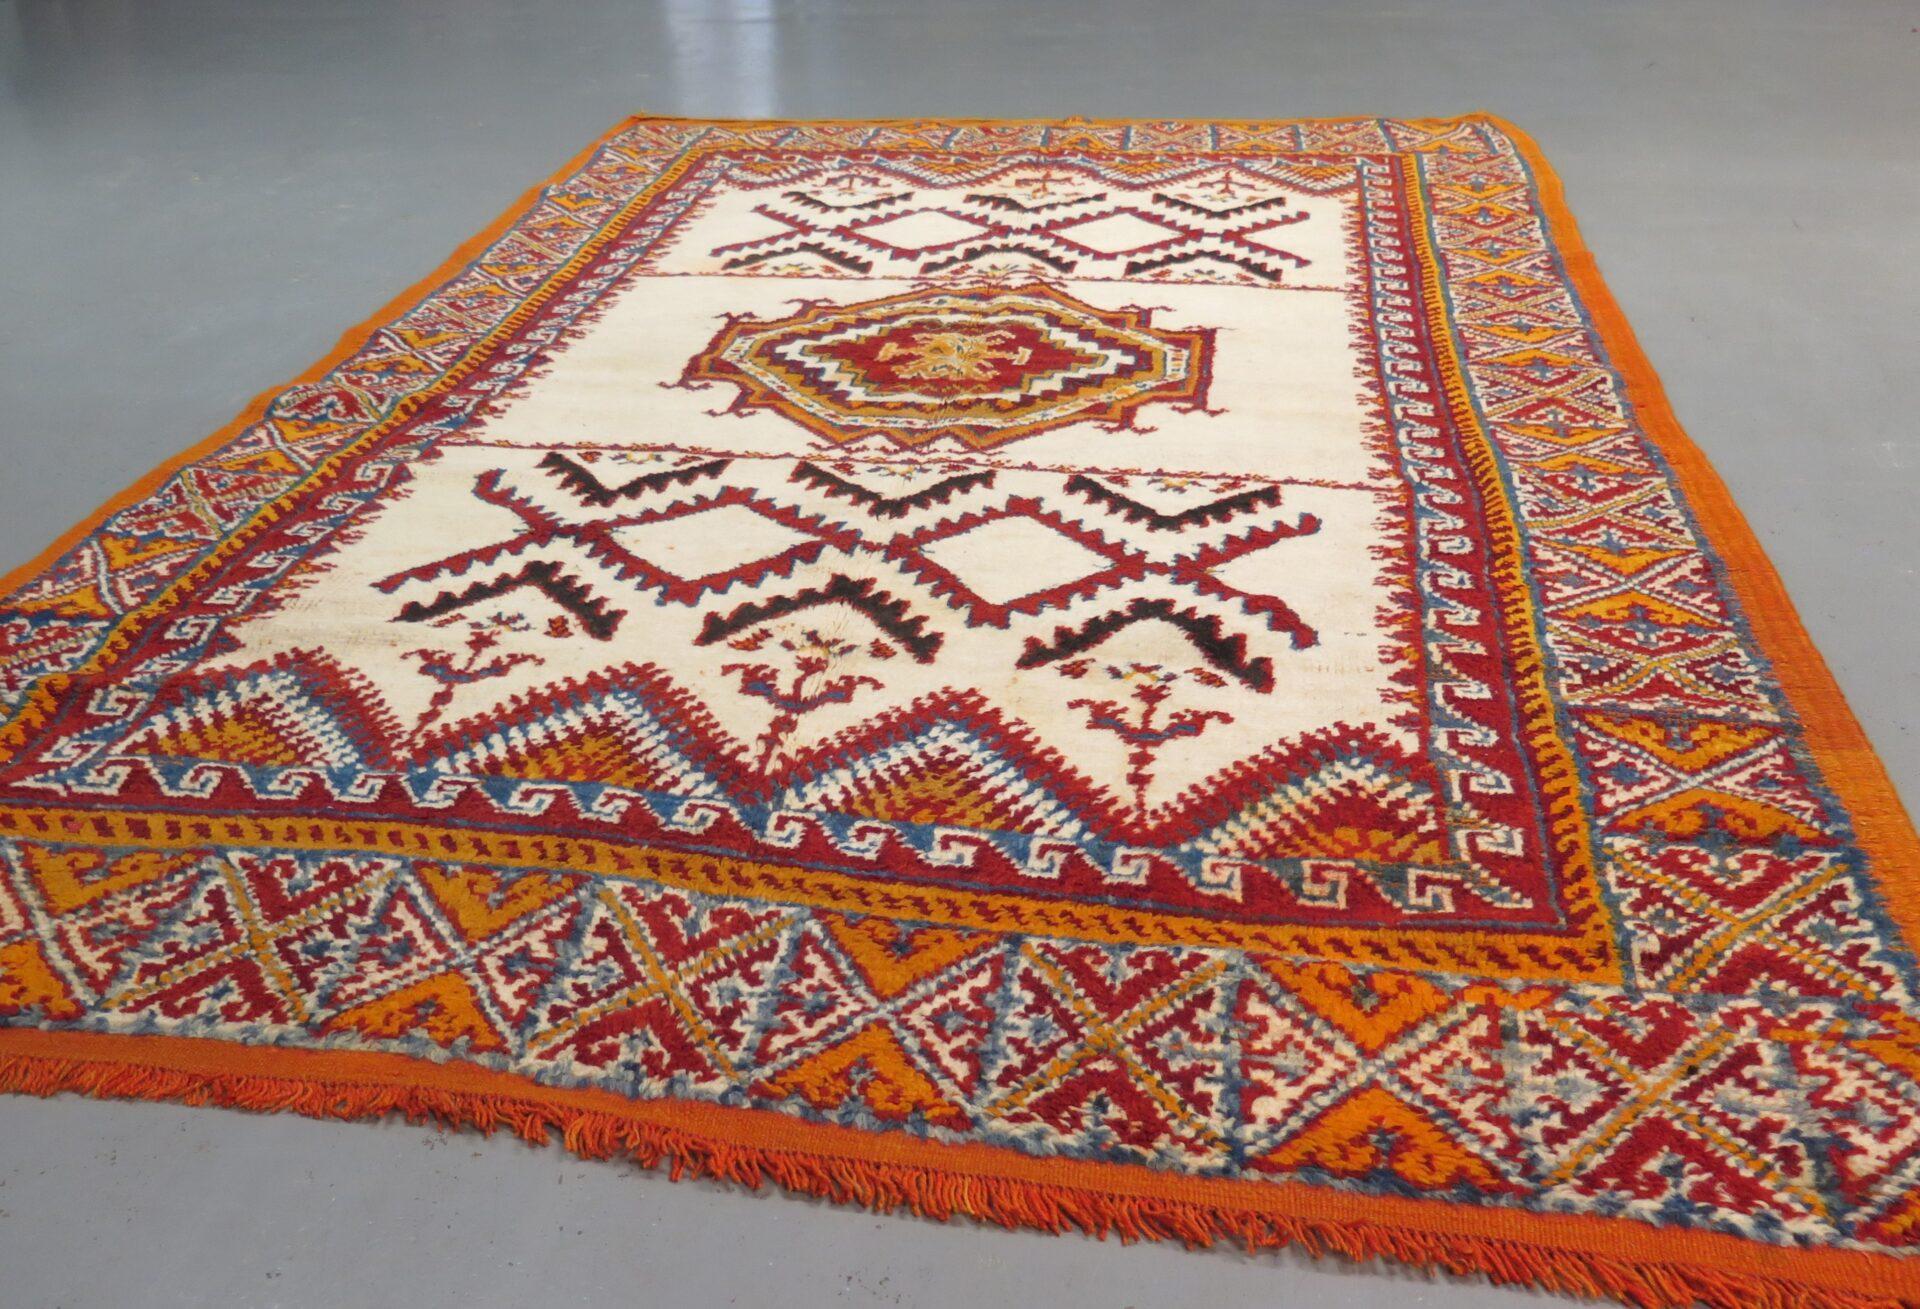 An early 20th Century Moroccan carpet, hand-knotted in high-grade wool - these pieces have been handwoven by the Berber peoples of the Atlas Mountains for generations, though in the 20th Century, in particular, became a staple of Modernist design,